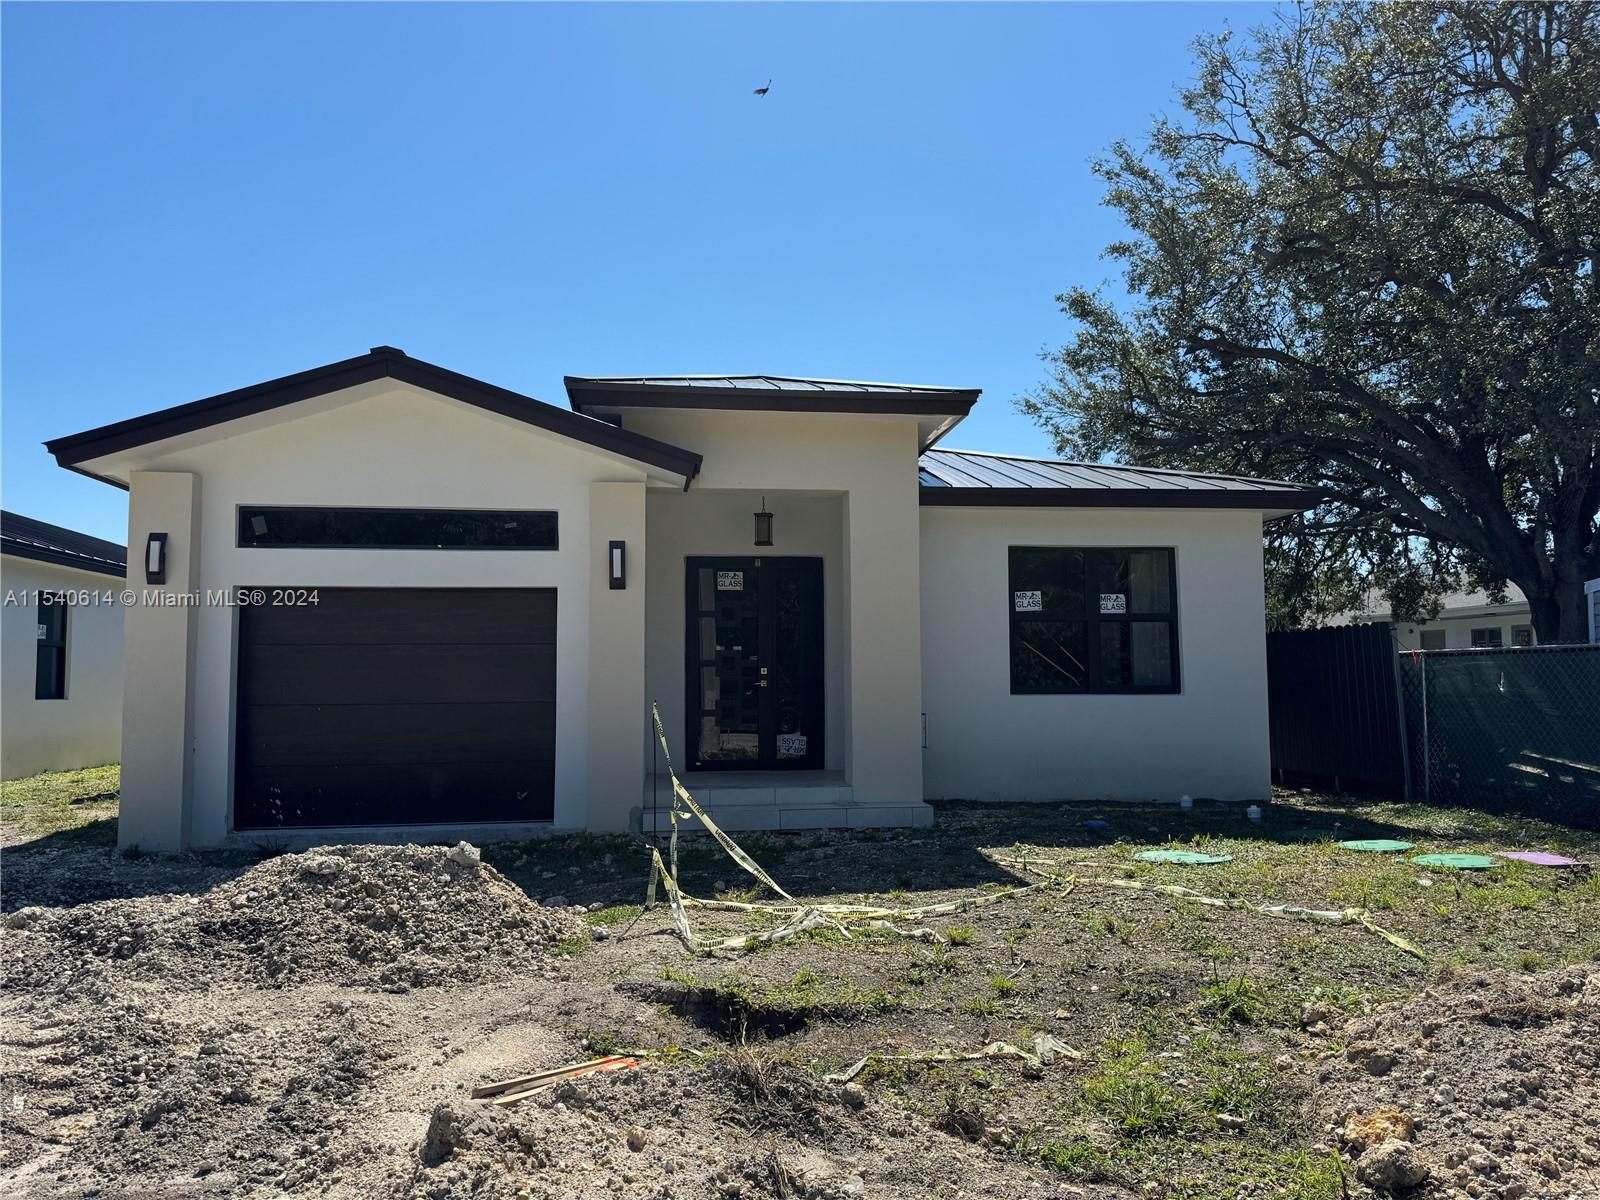 New Construction knocking the door! Spectacular house with 4 bedroom/3 bath and a half. One of the bedrooms has an independent entrance. Luxury finishes, impact doors and windows, spaces full of natural light. This is a must see!